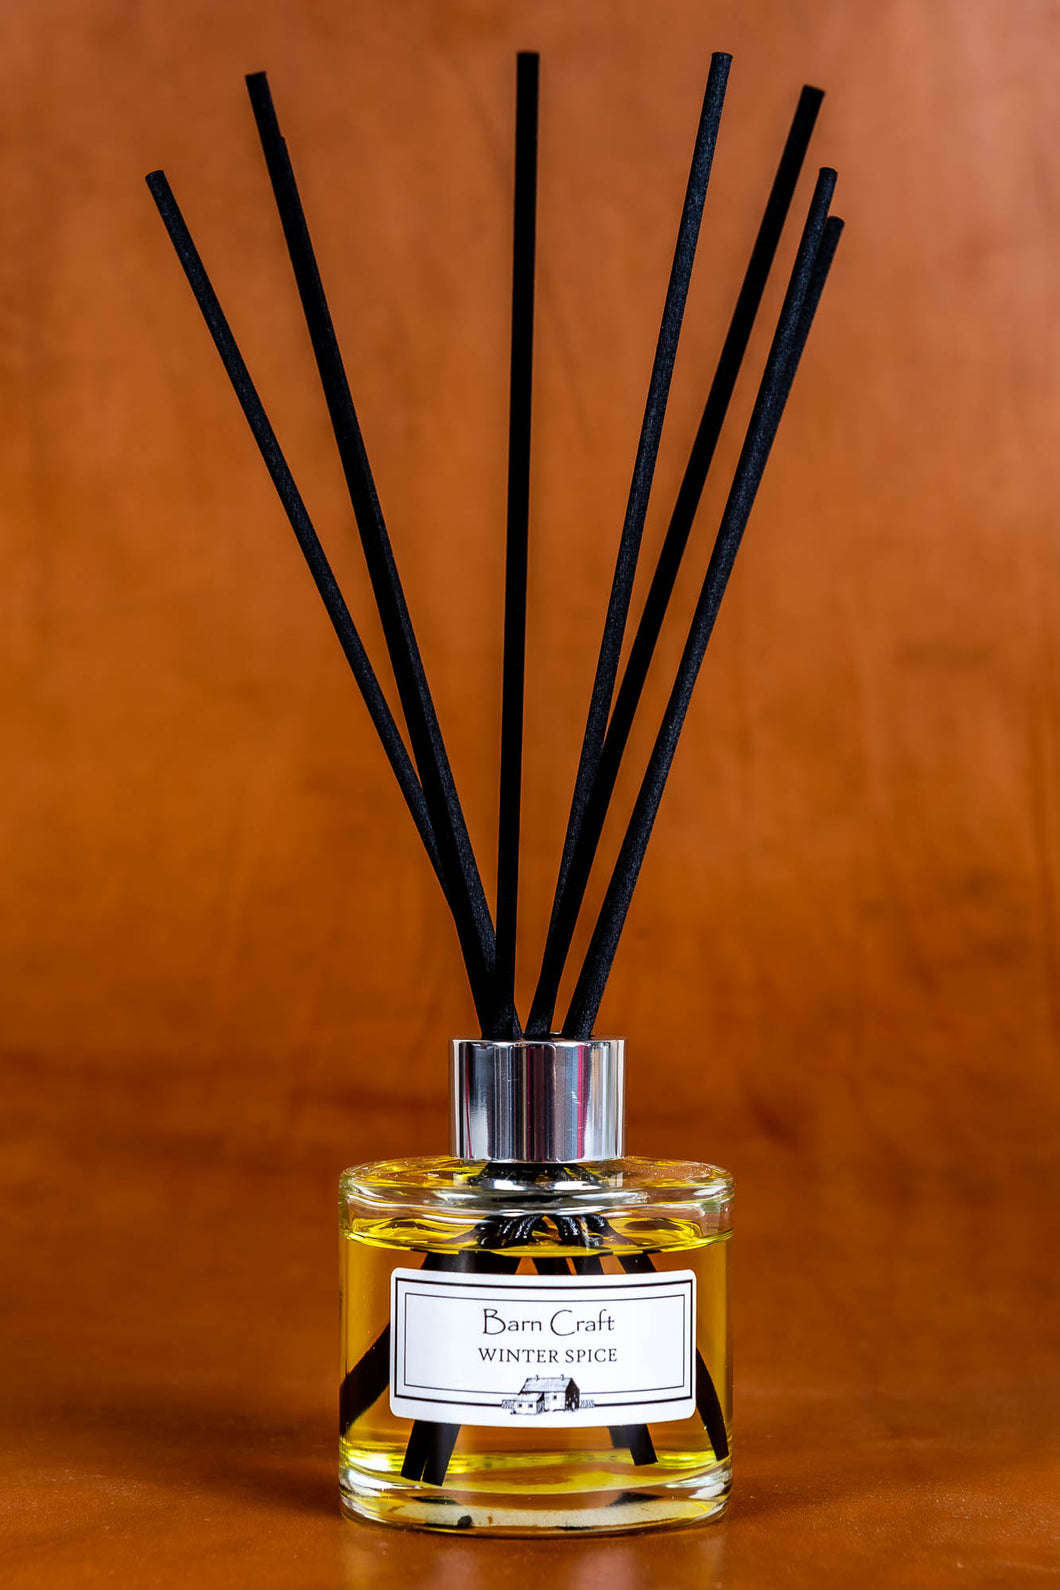 Winter Spice reed diffuser